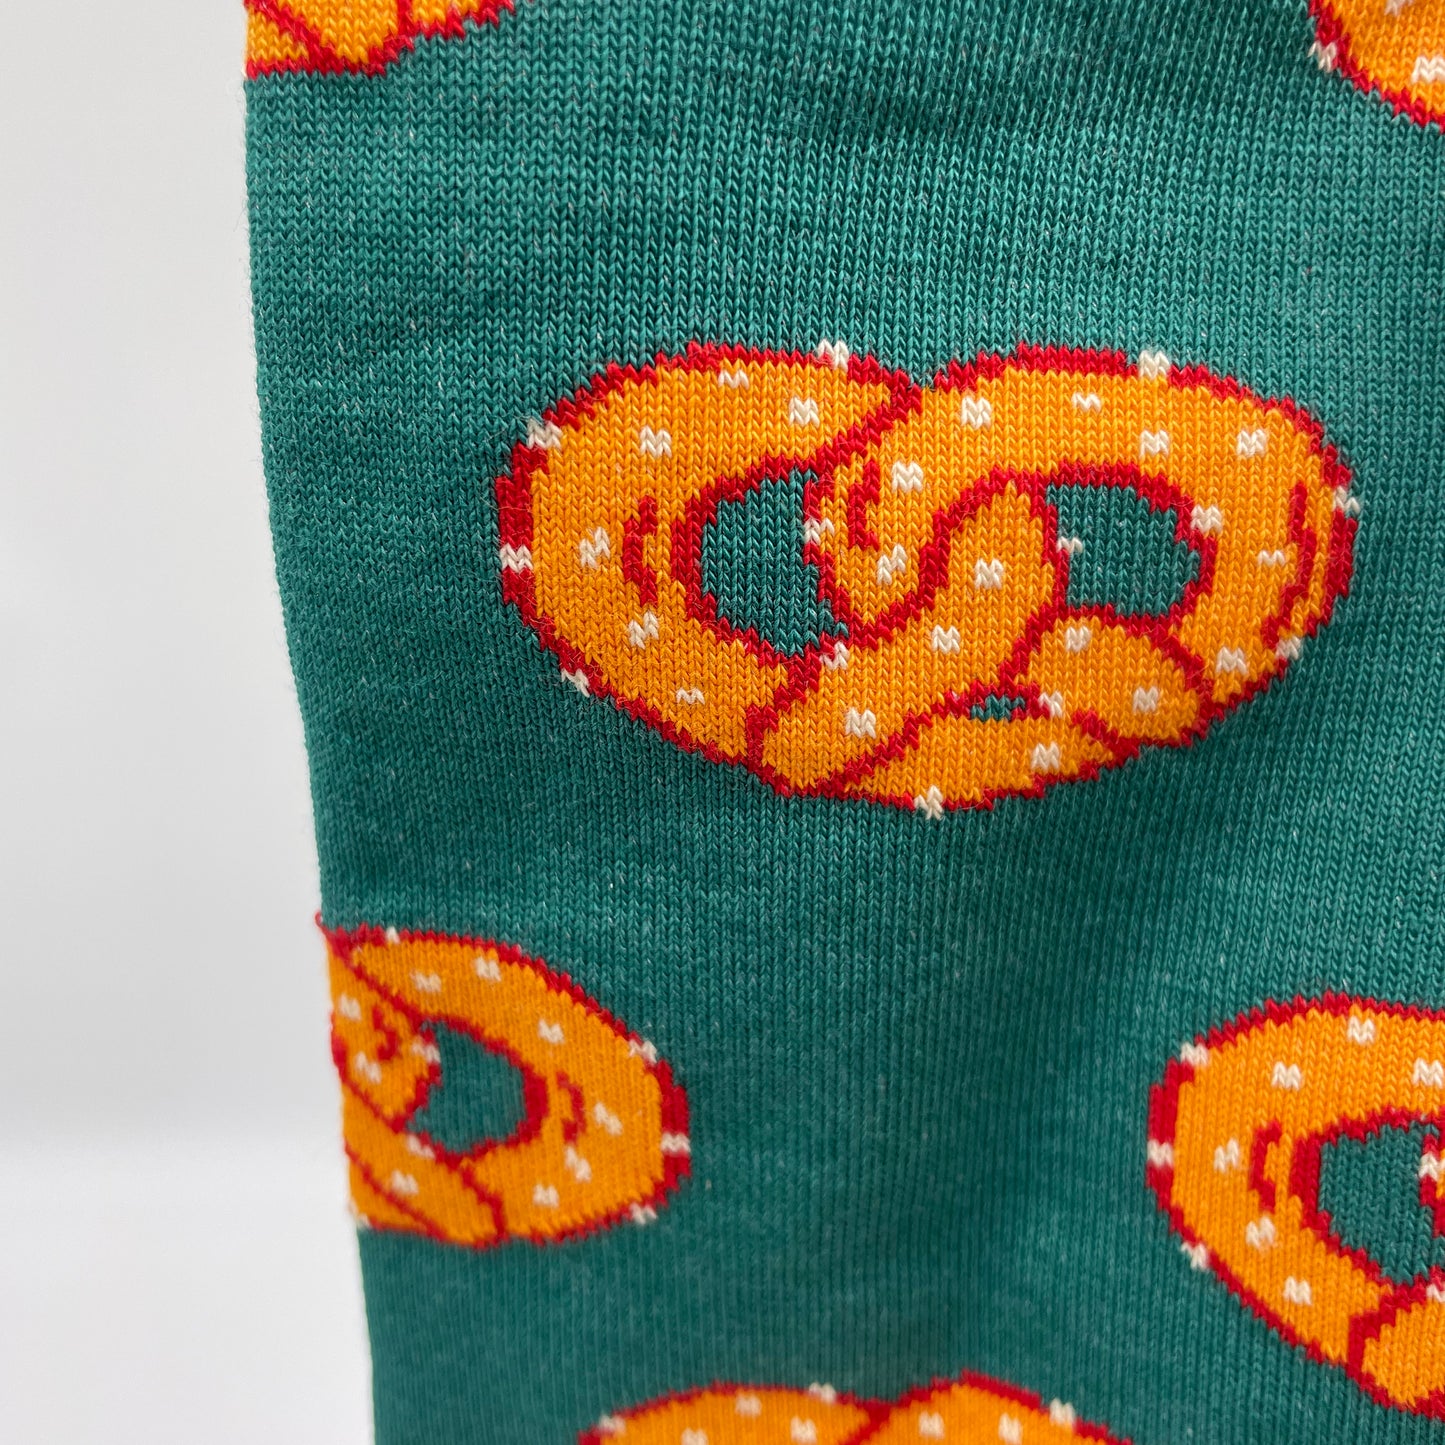 A close-up photo shows detail of a pretzel pattern woven into forest green organic cotton socks.